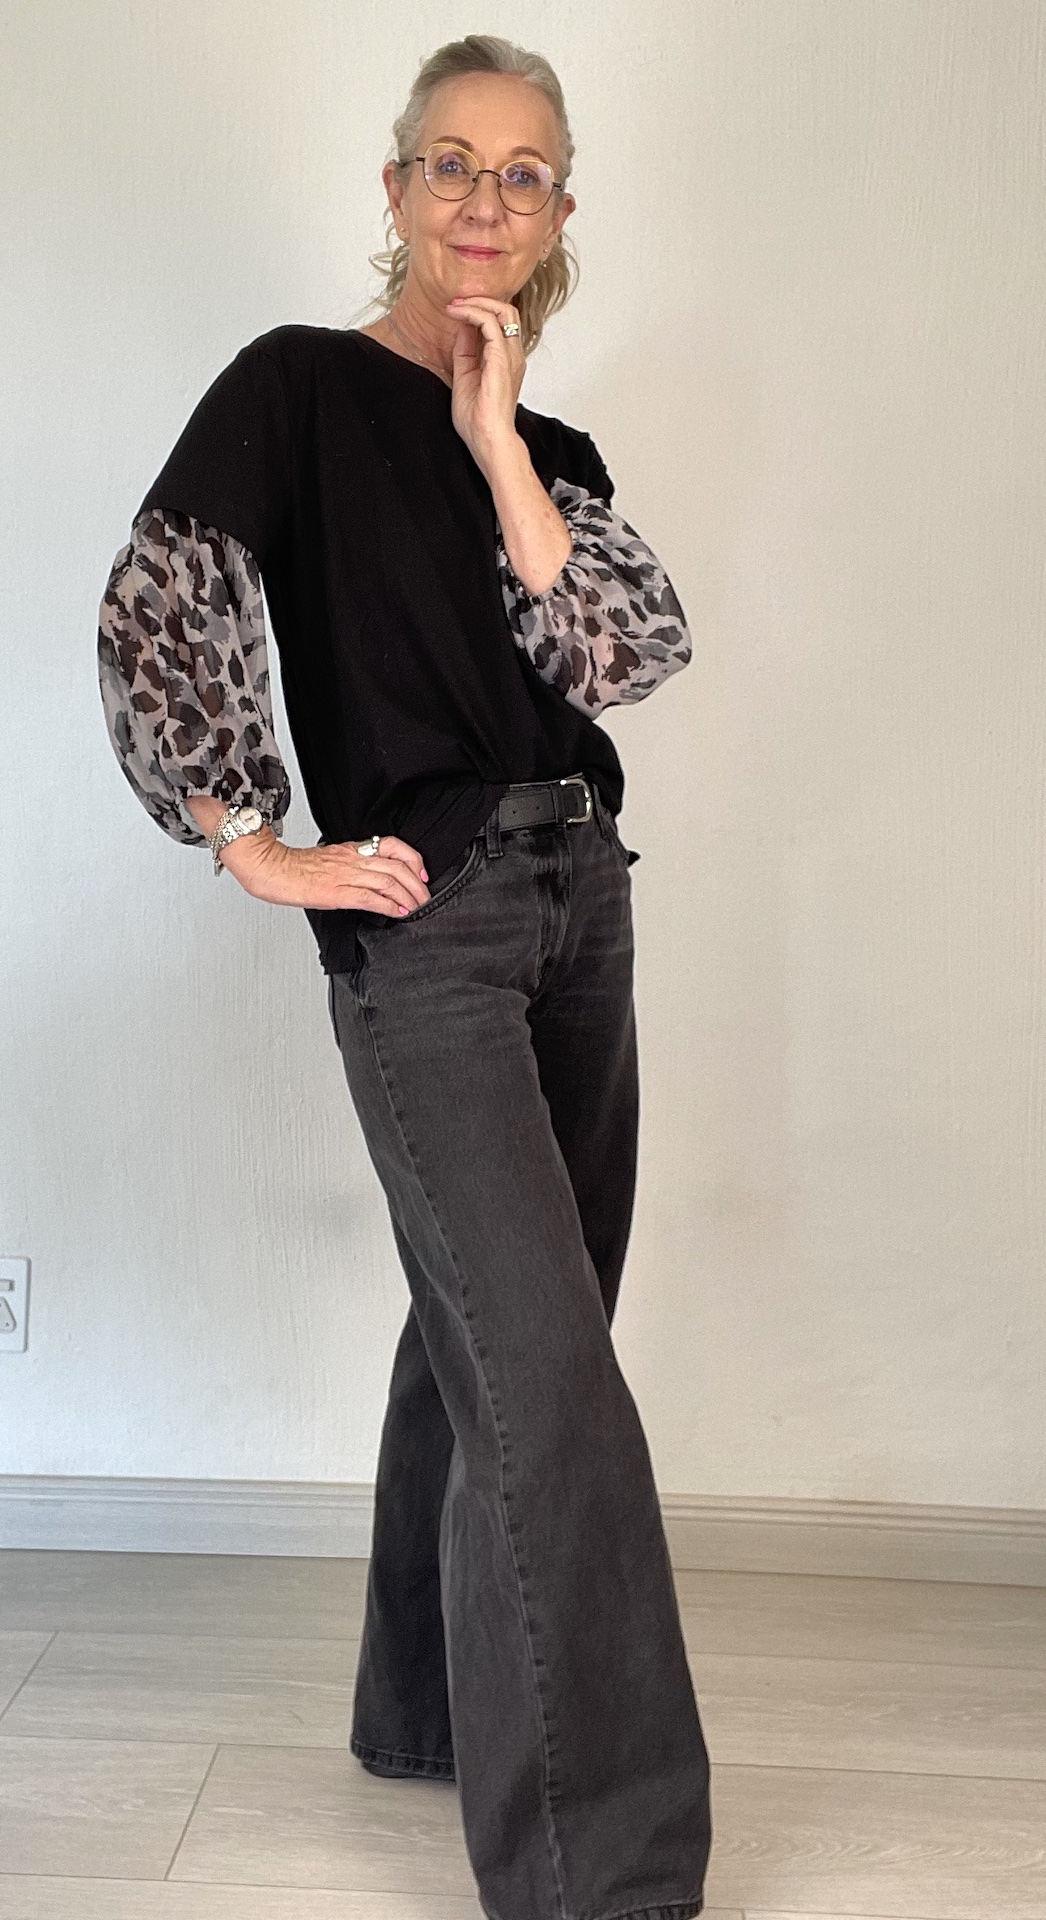 Black T – style 5 with animal print soft sleeve